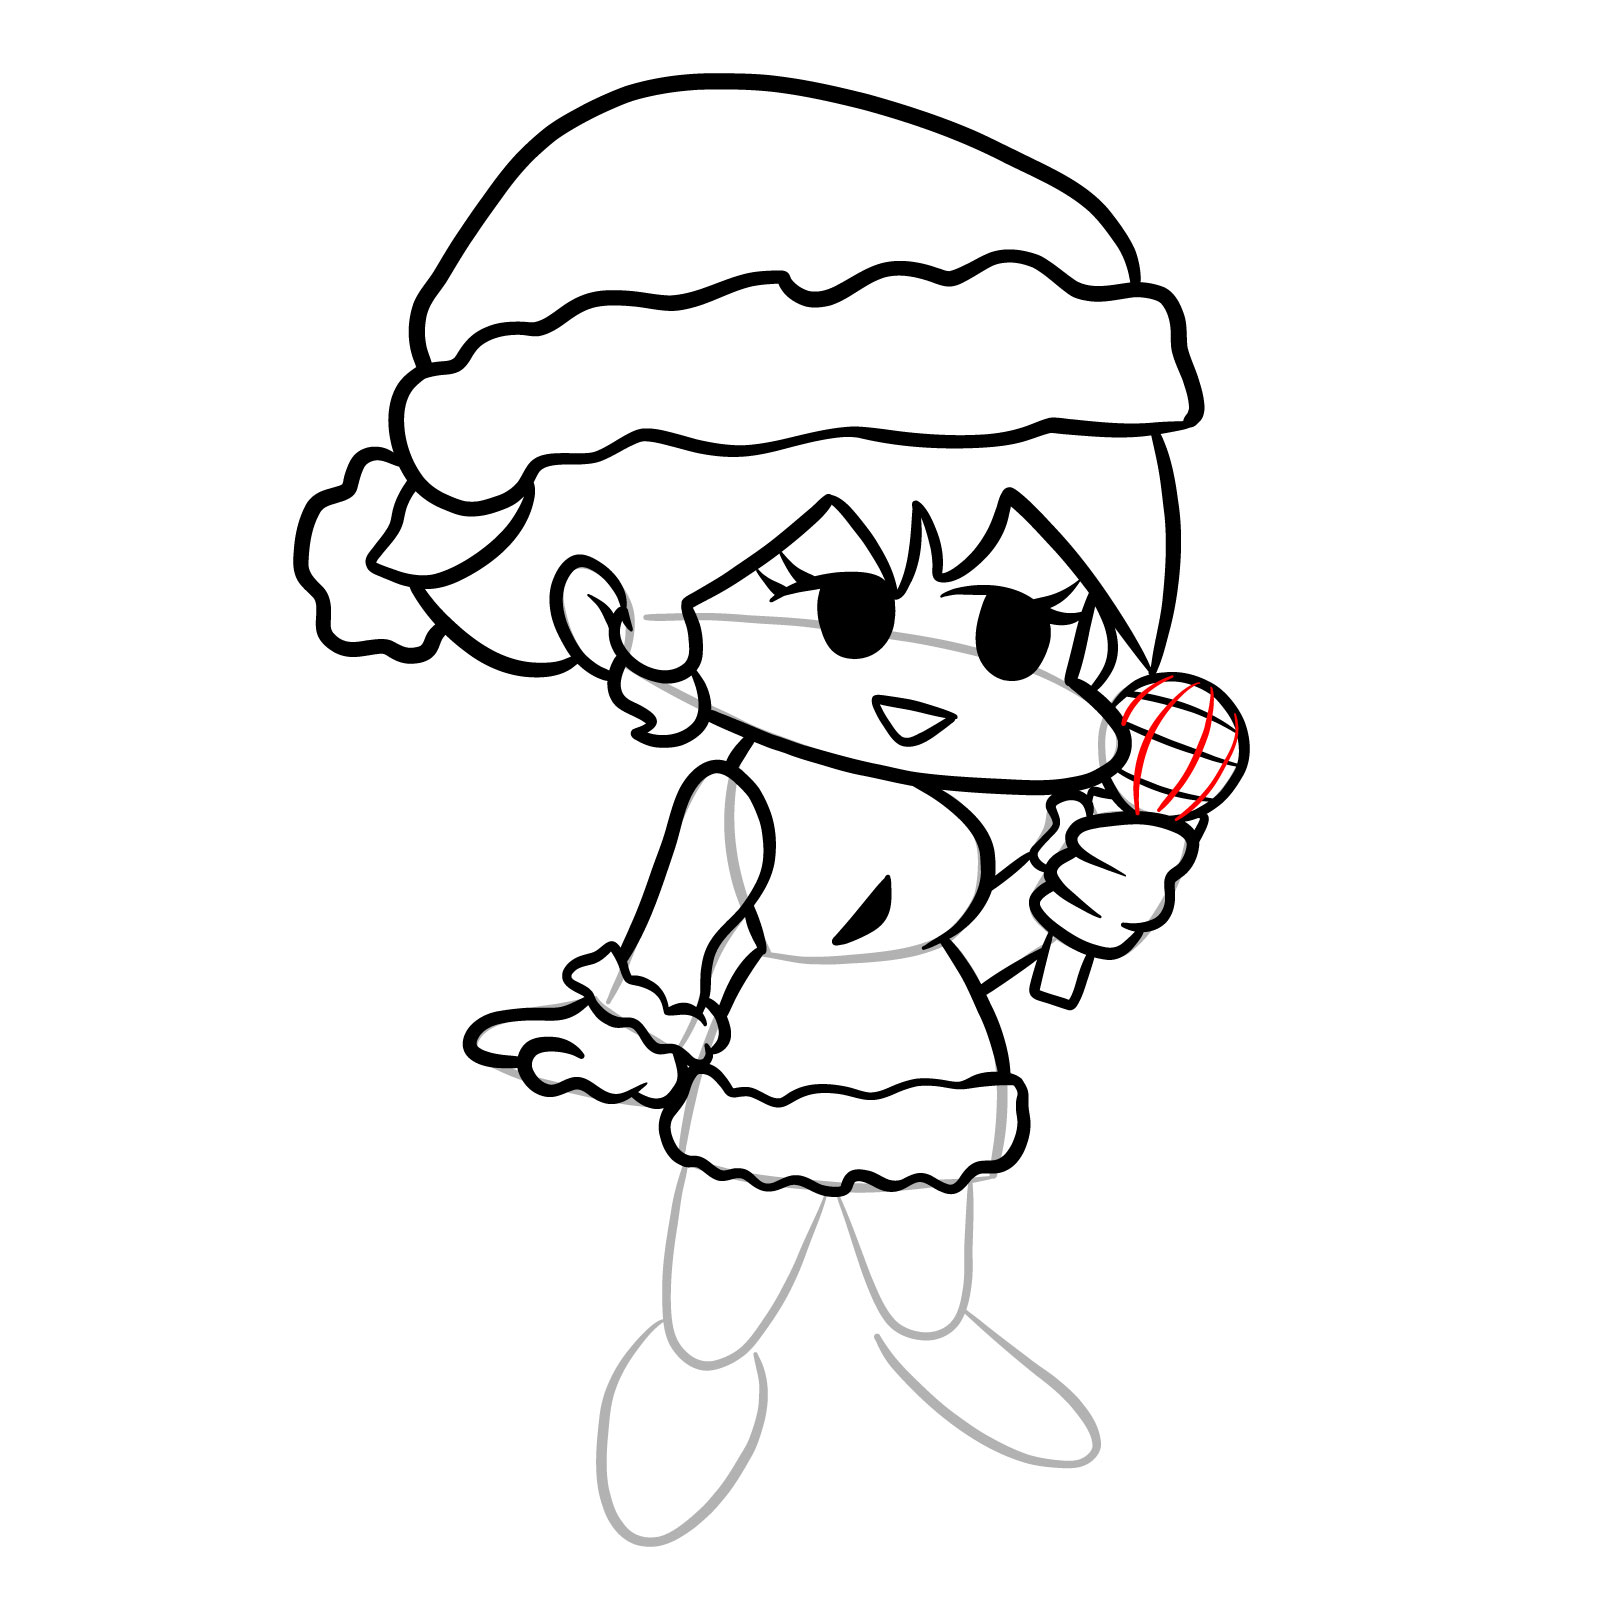 How to draw standing Santa GF - step 22